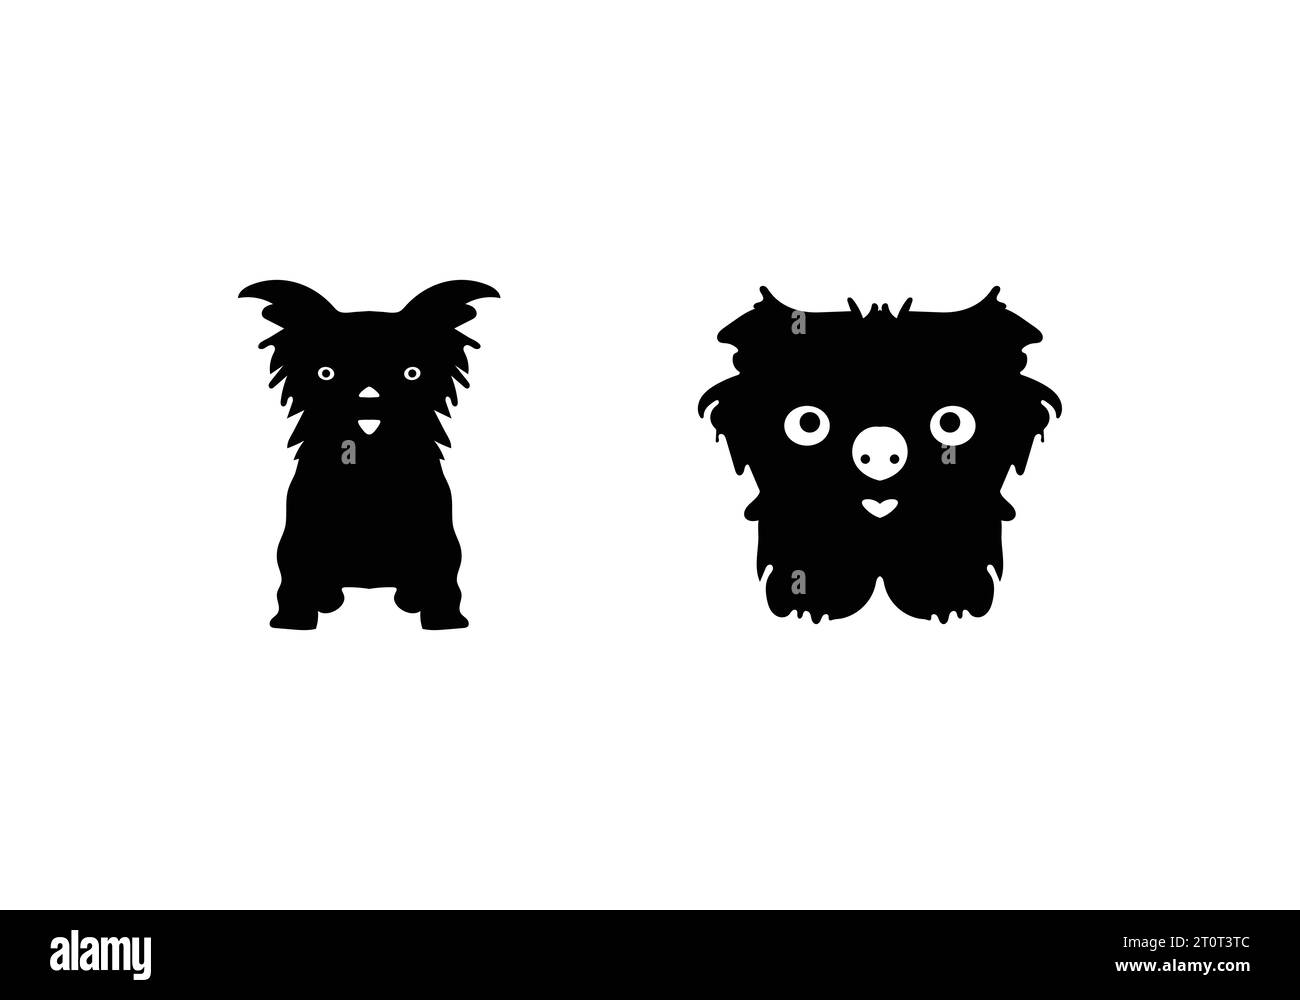 New unique minimal style Brussels Griffon icon illustration- Stock Vector